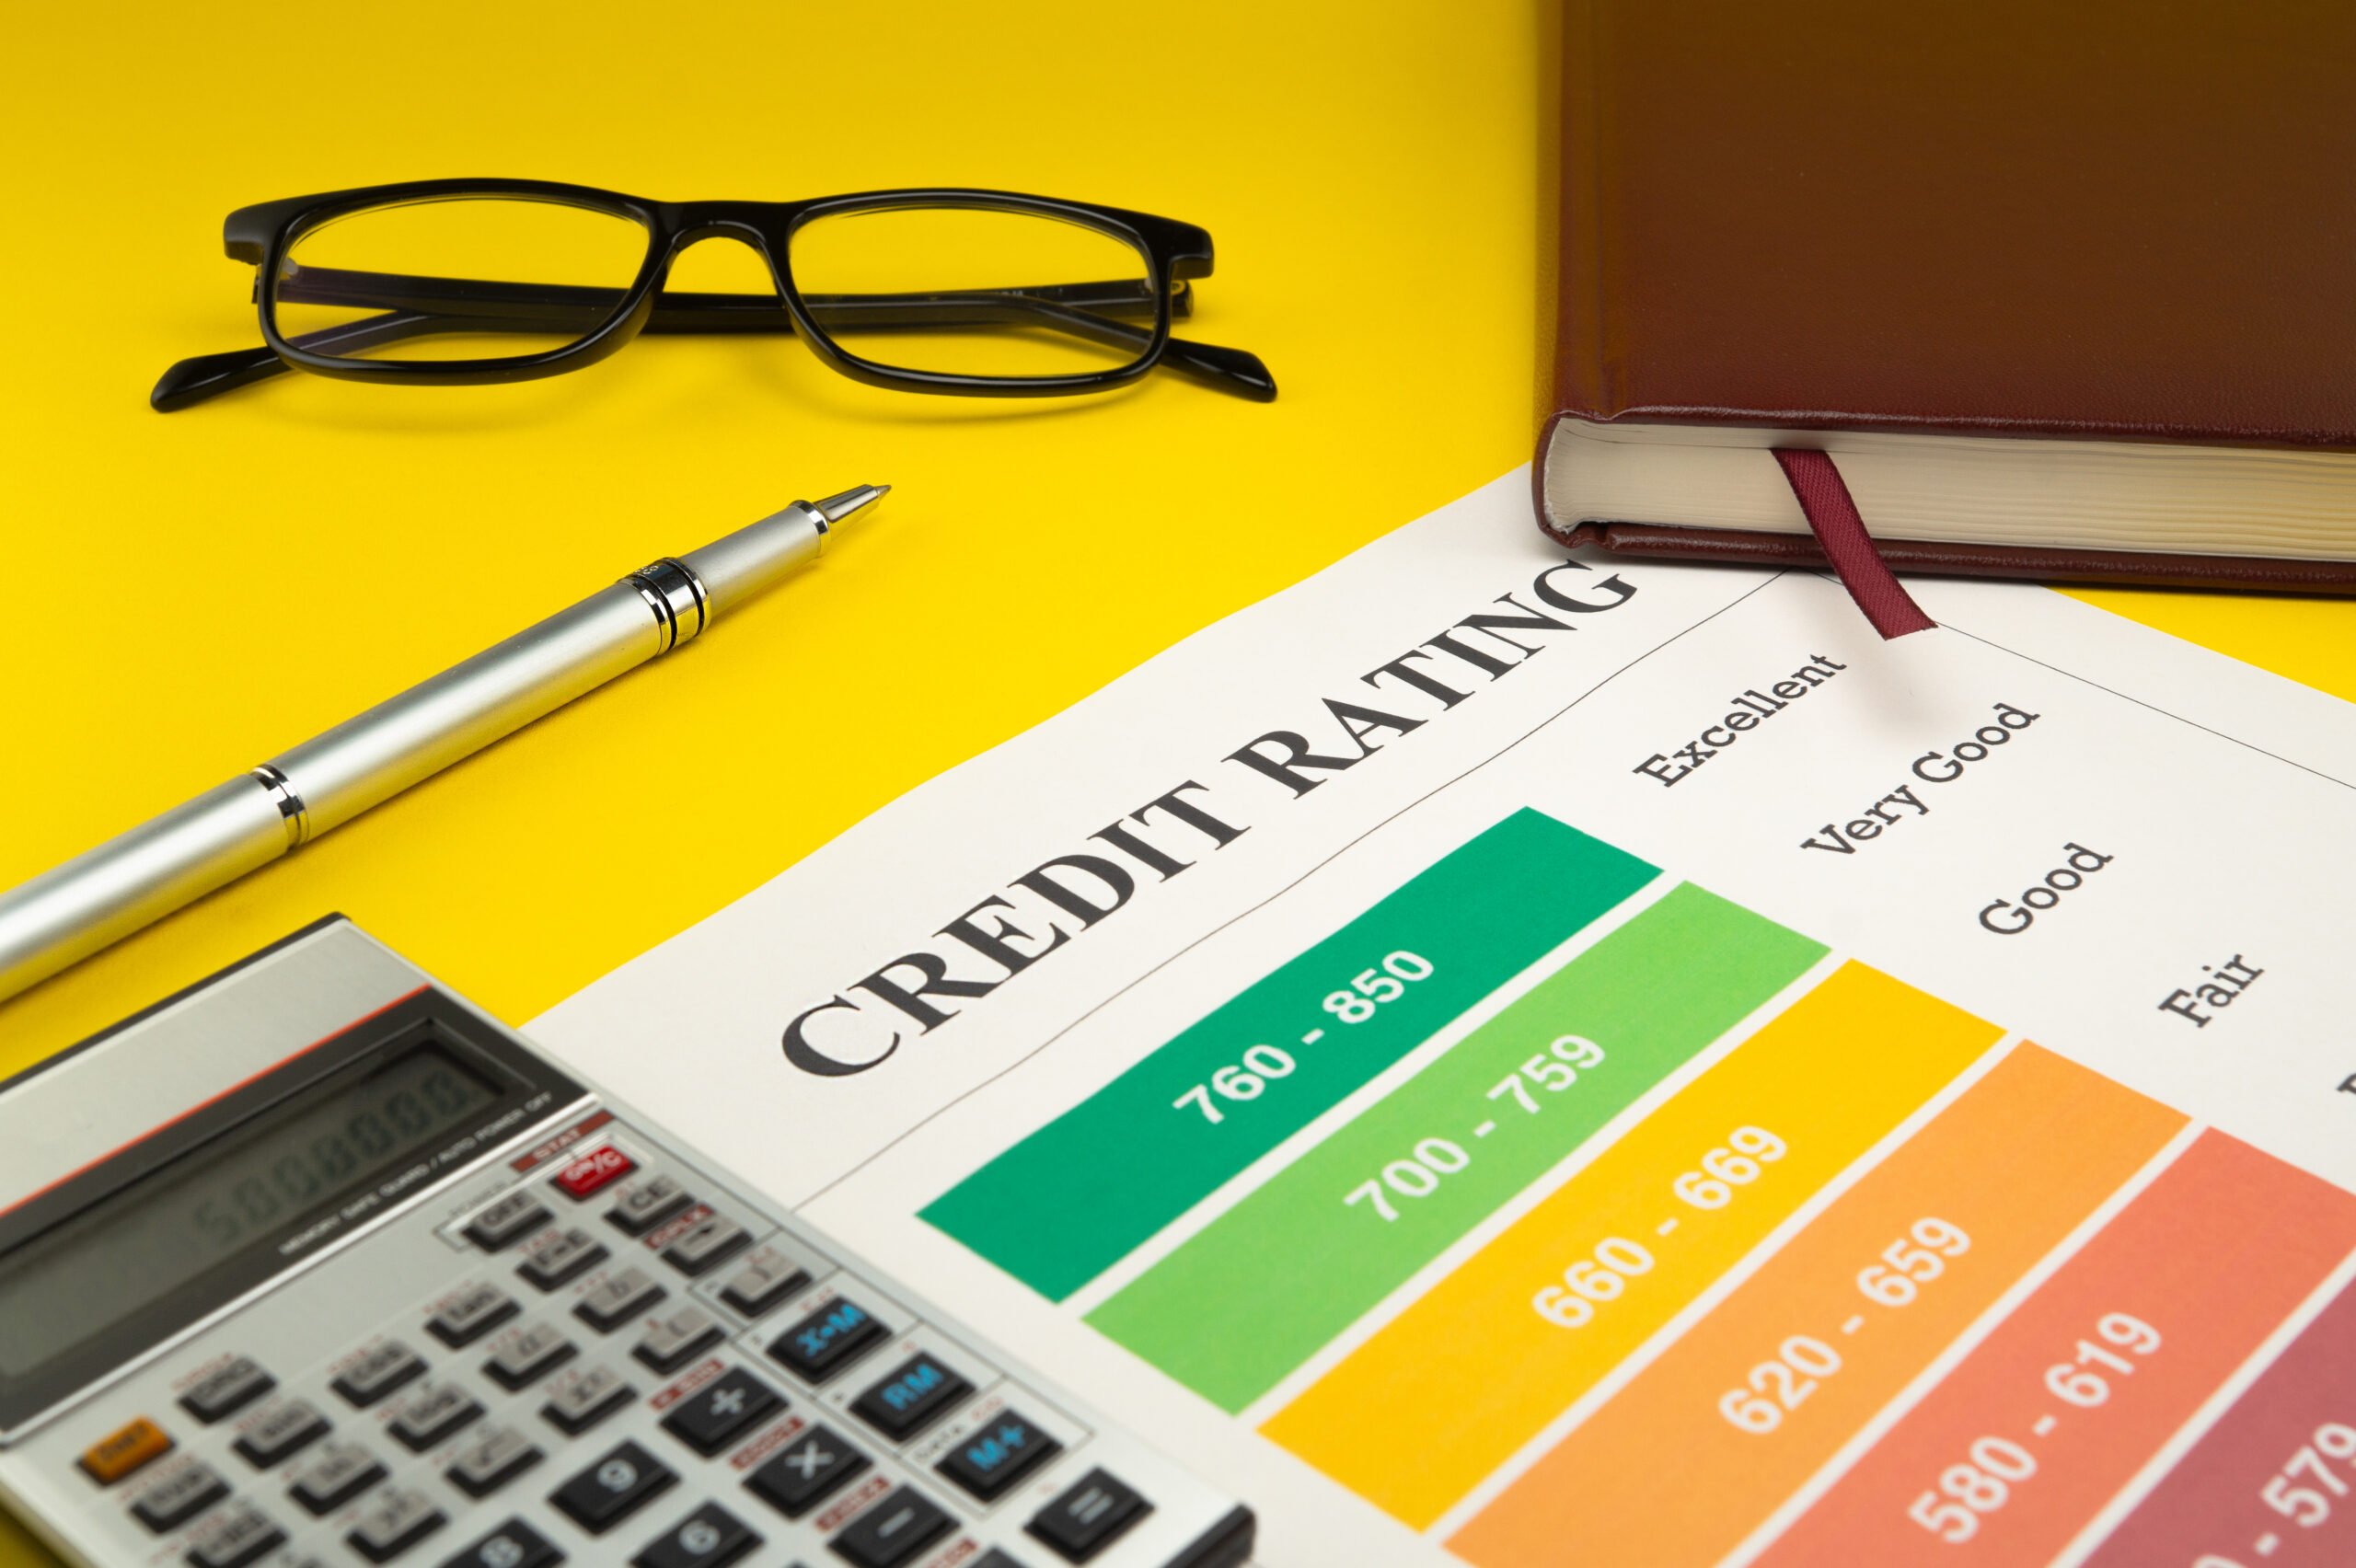 Illustration of a detailed credit score report showing various factors affecting credit ratings, including payment history, credit utilization, and account age.